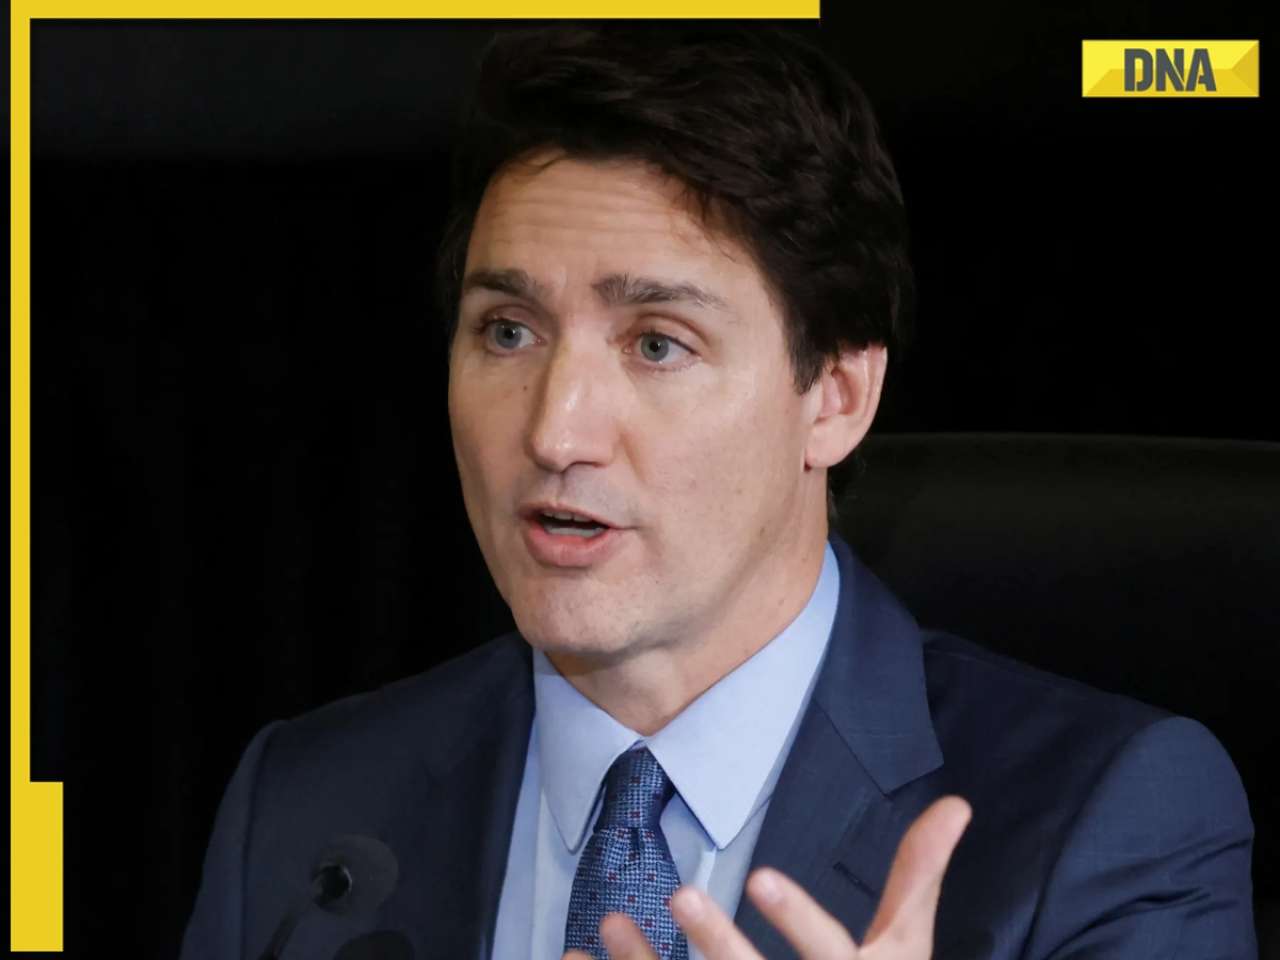 'China tried to meddle but...': PM Justin Trudeau defends integrity of Canadian elections